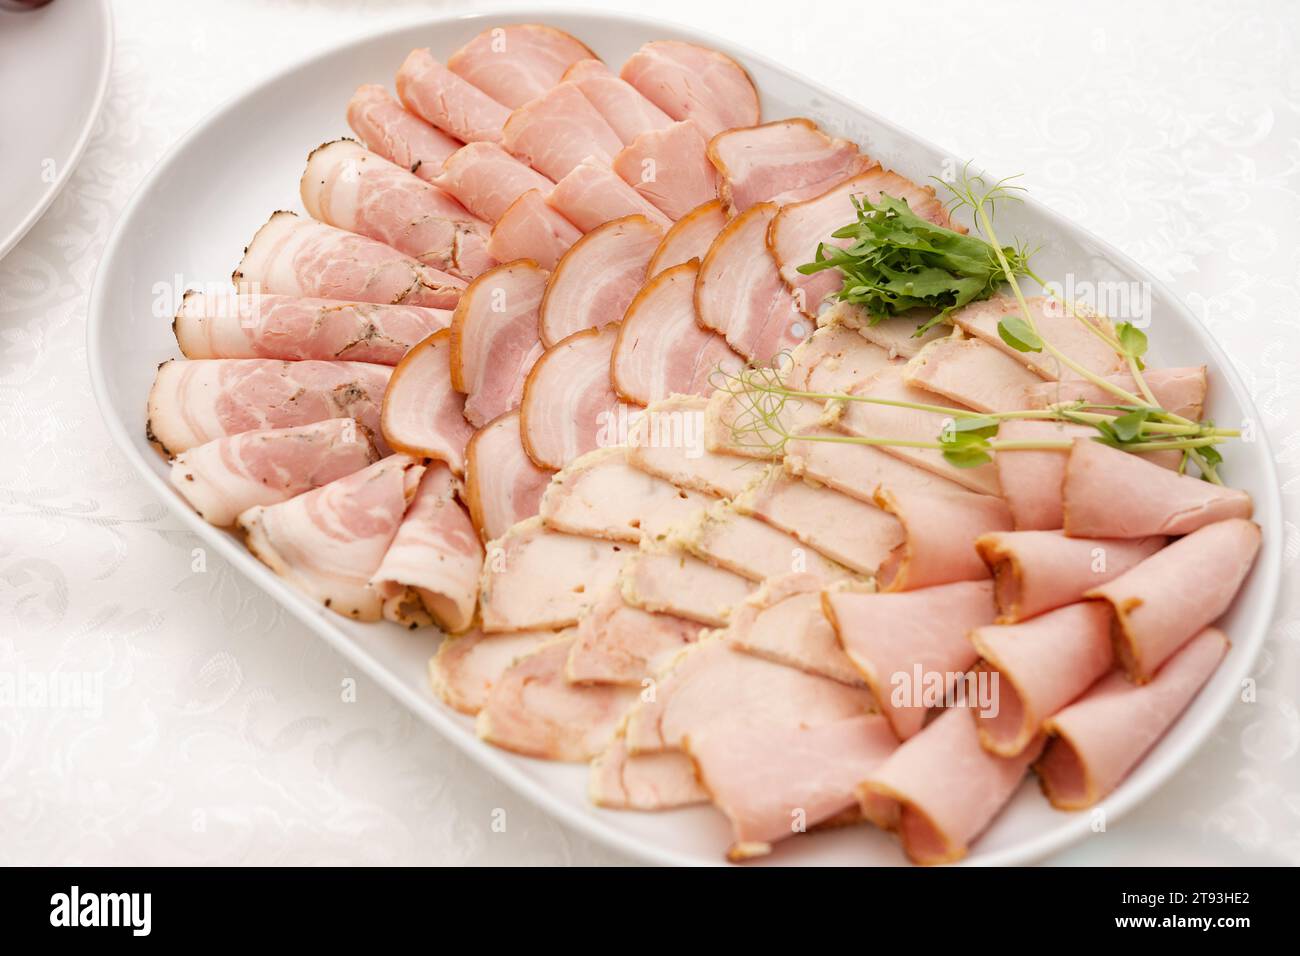 Meat cutting and its presentation on the festive table, ham meat appetizer. Stock Photo